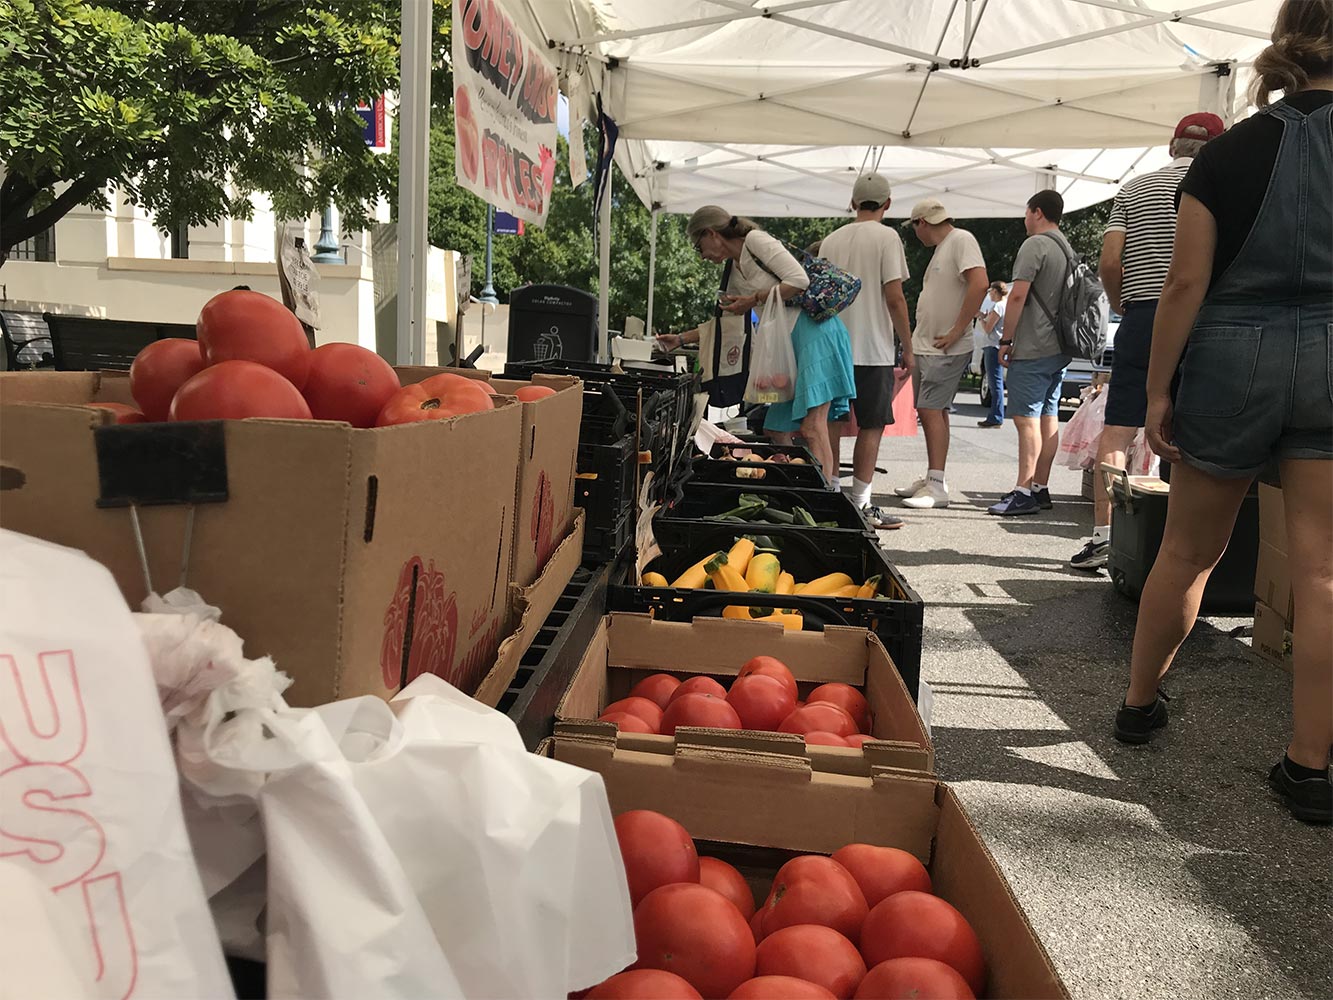 The farmers' market at AU